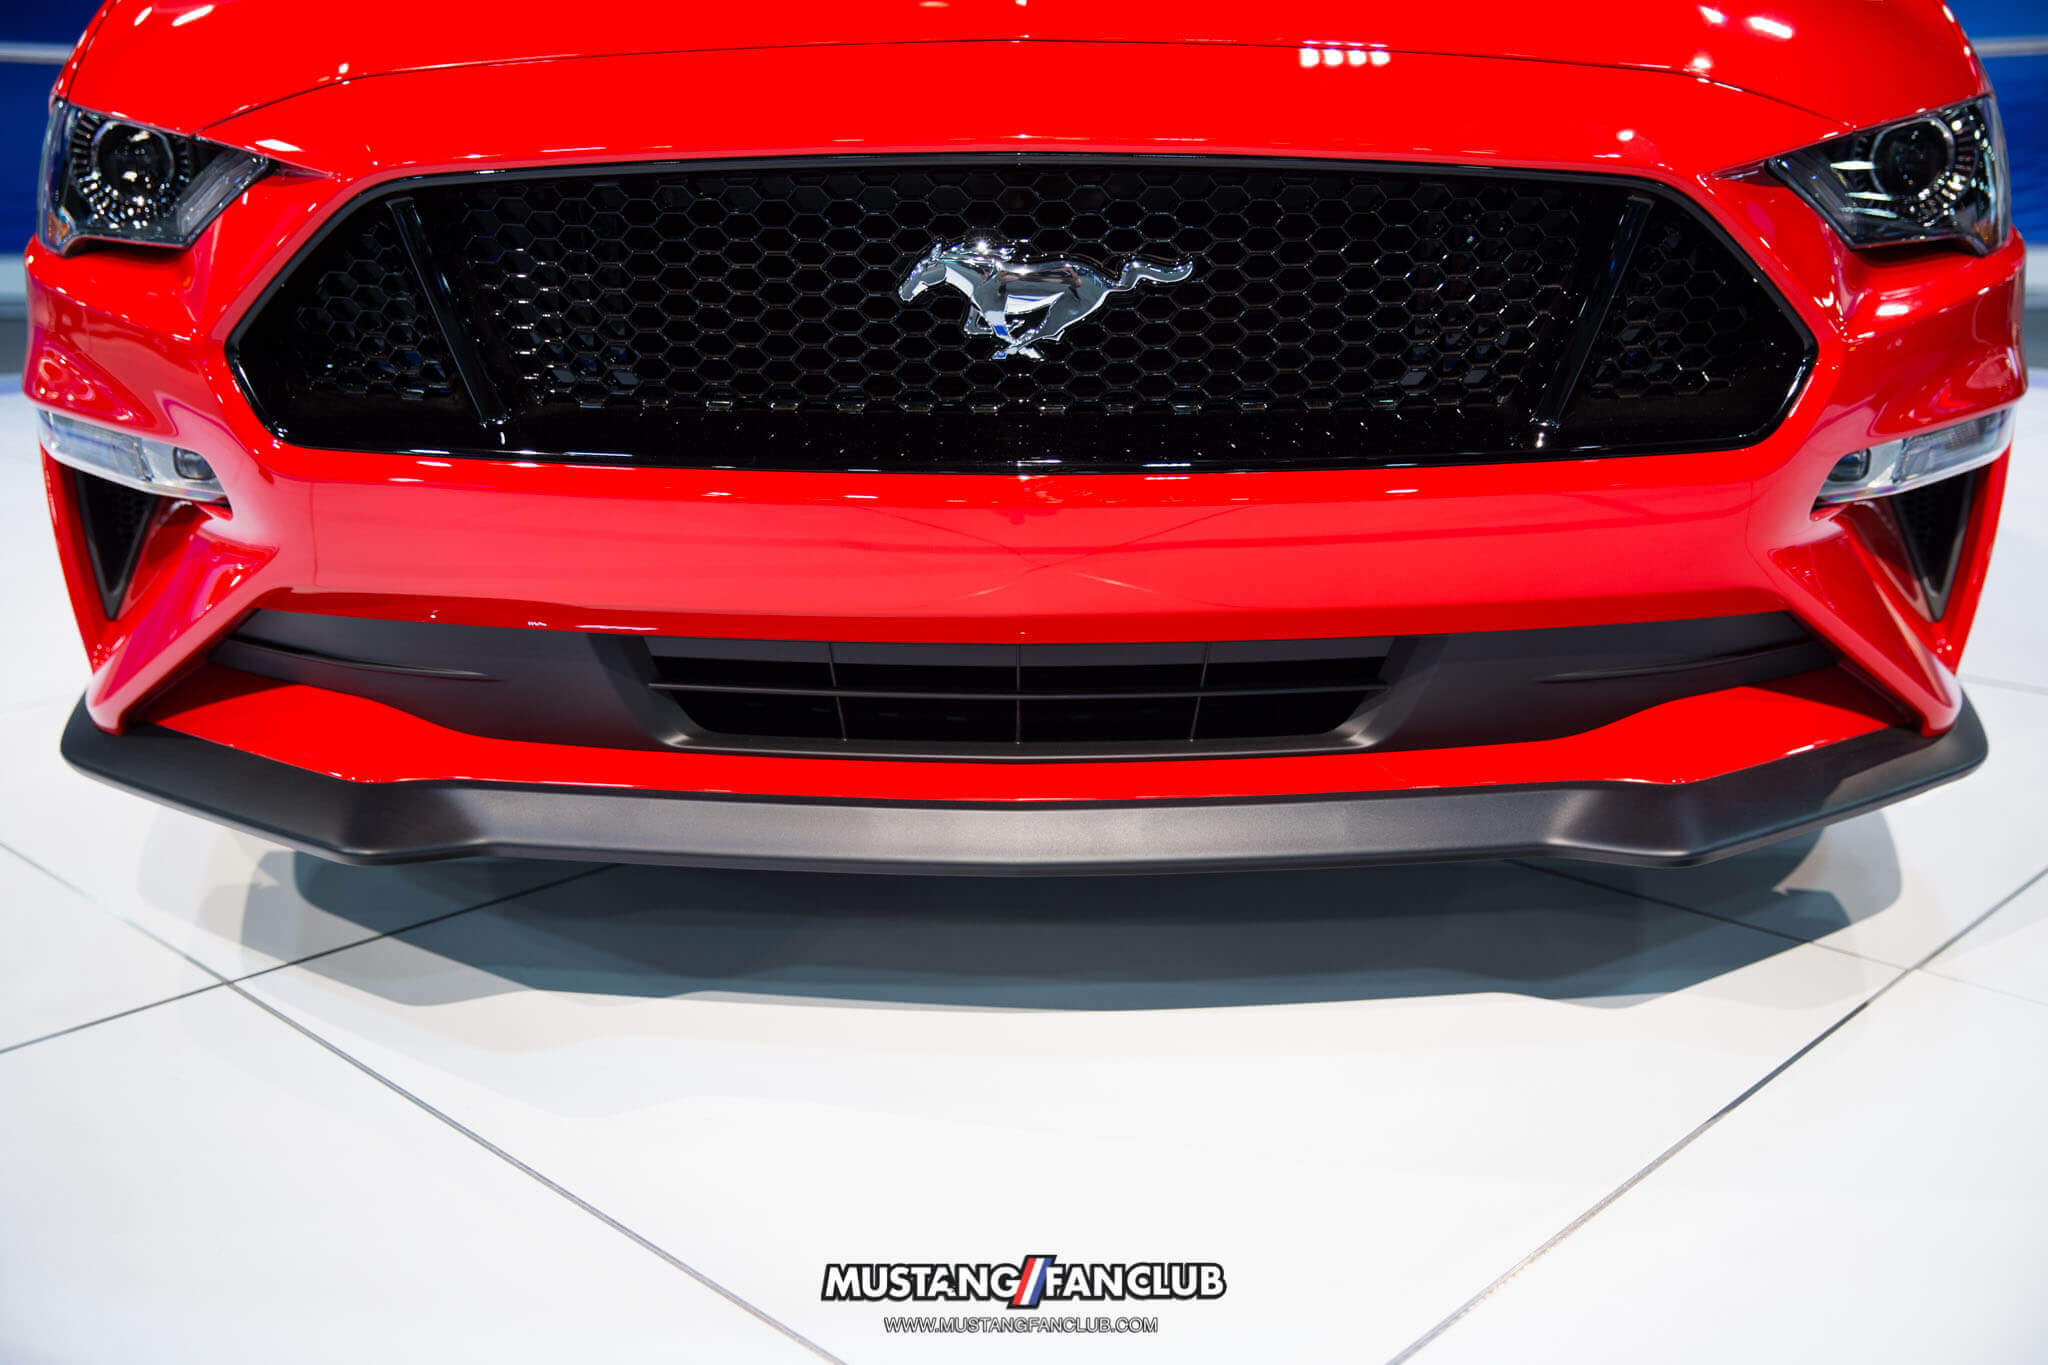 2018 18' 18 Mustang S550 mustangfanclub fan club atlanta international auto show 17 2017 AIAS17 AIAS2017 new race red gt500 mach 1 bullit gt performance package